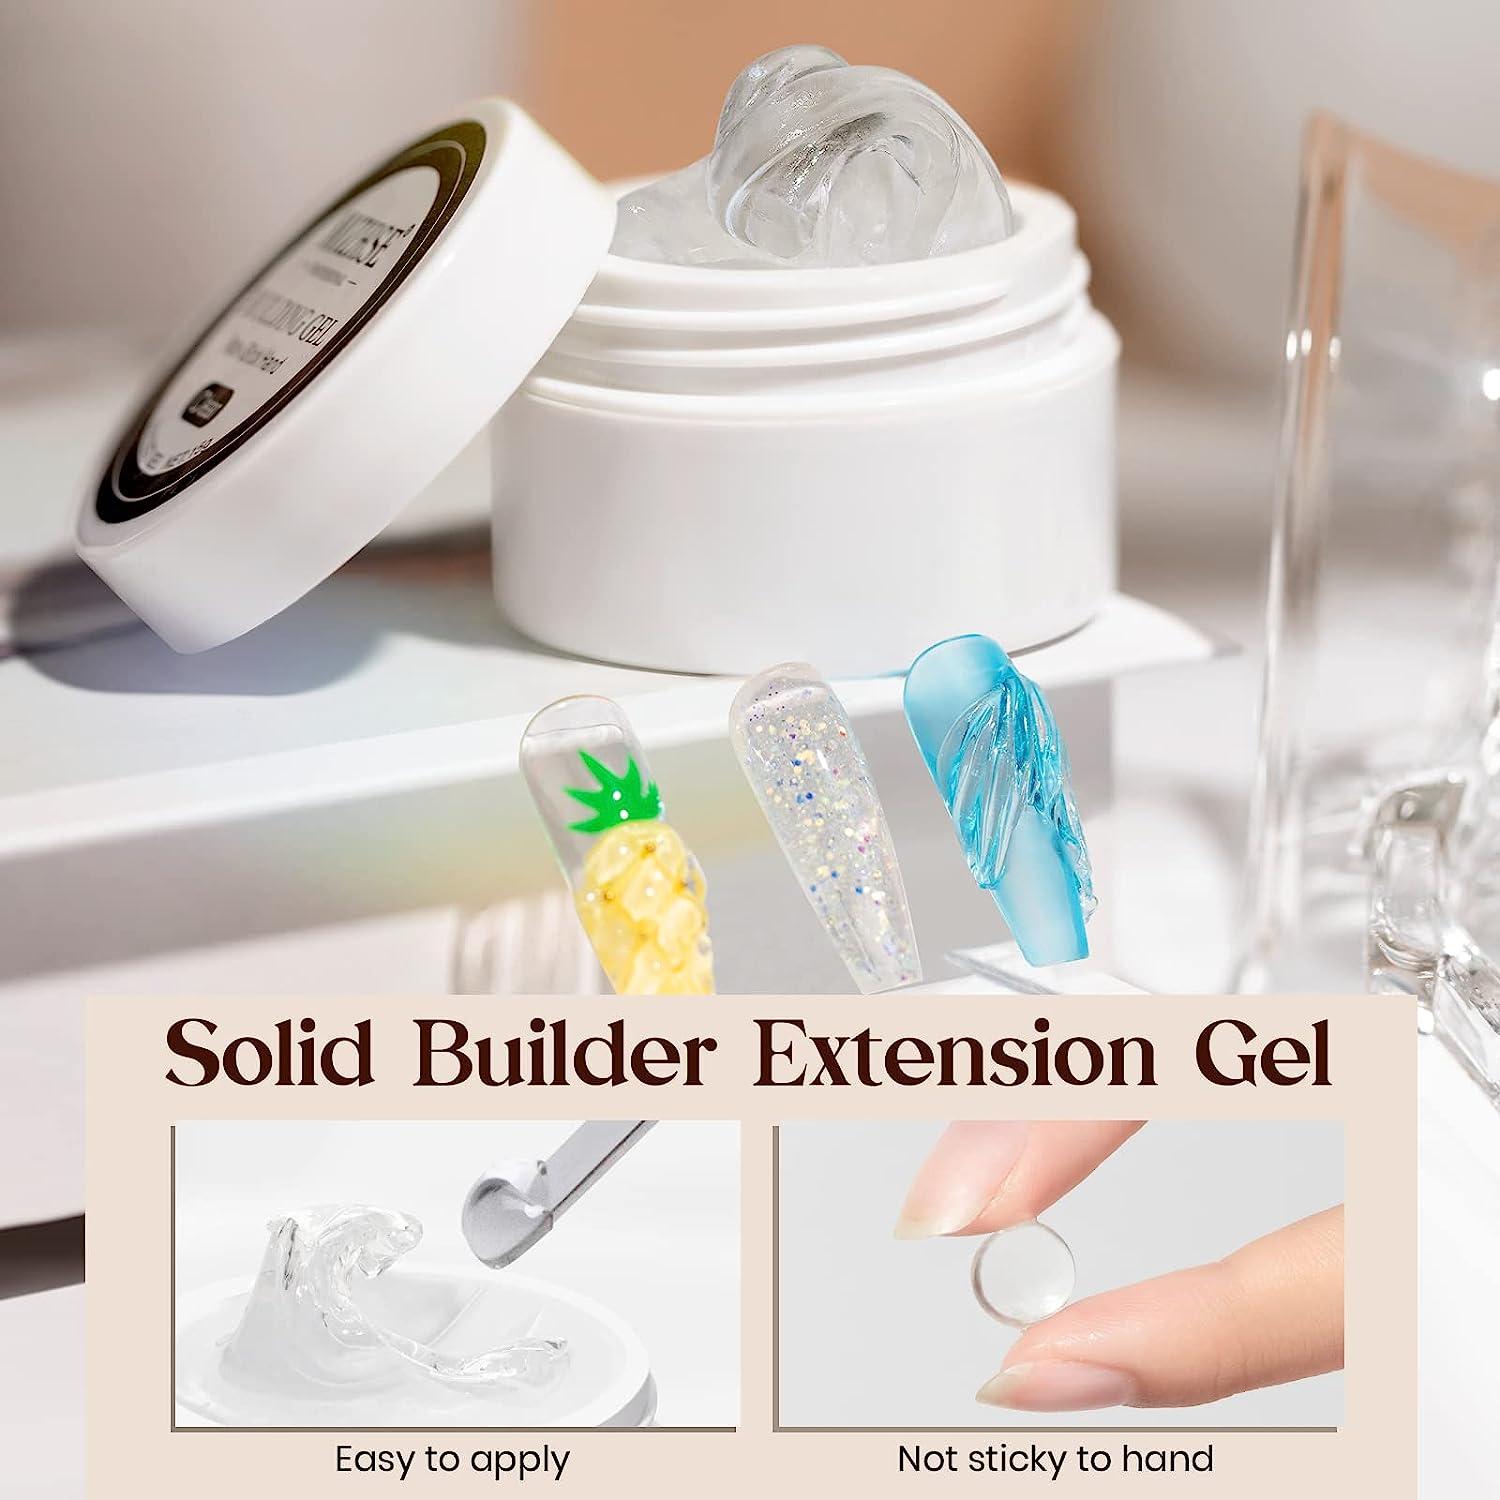  MIZHSE Solid Builder Gel for Nails, 60g Large Capacity Clear  Hard Gel for Nails 3D Sculpting Gel Non-Sticky Hand Carving Gel UV LED Nail  Extension Gel with 3D Silicone Mold